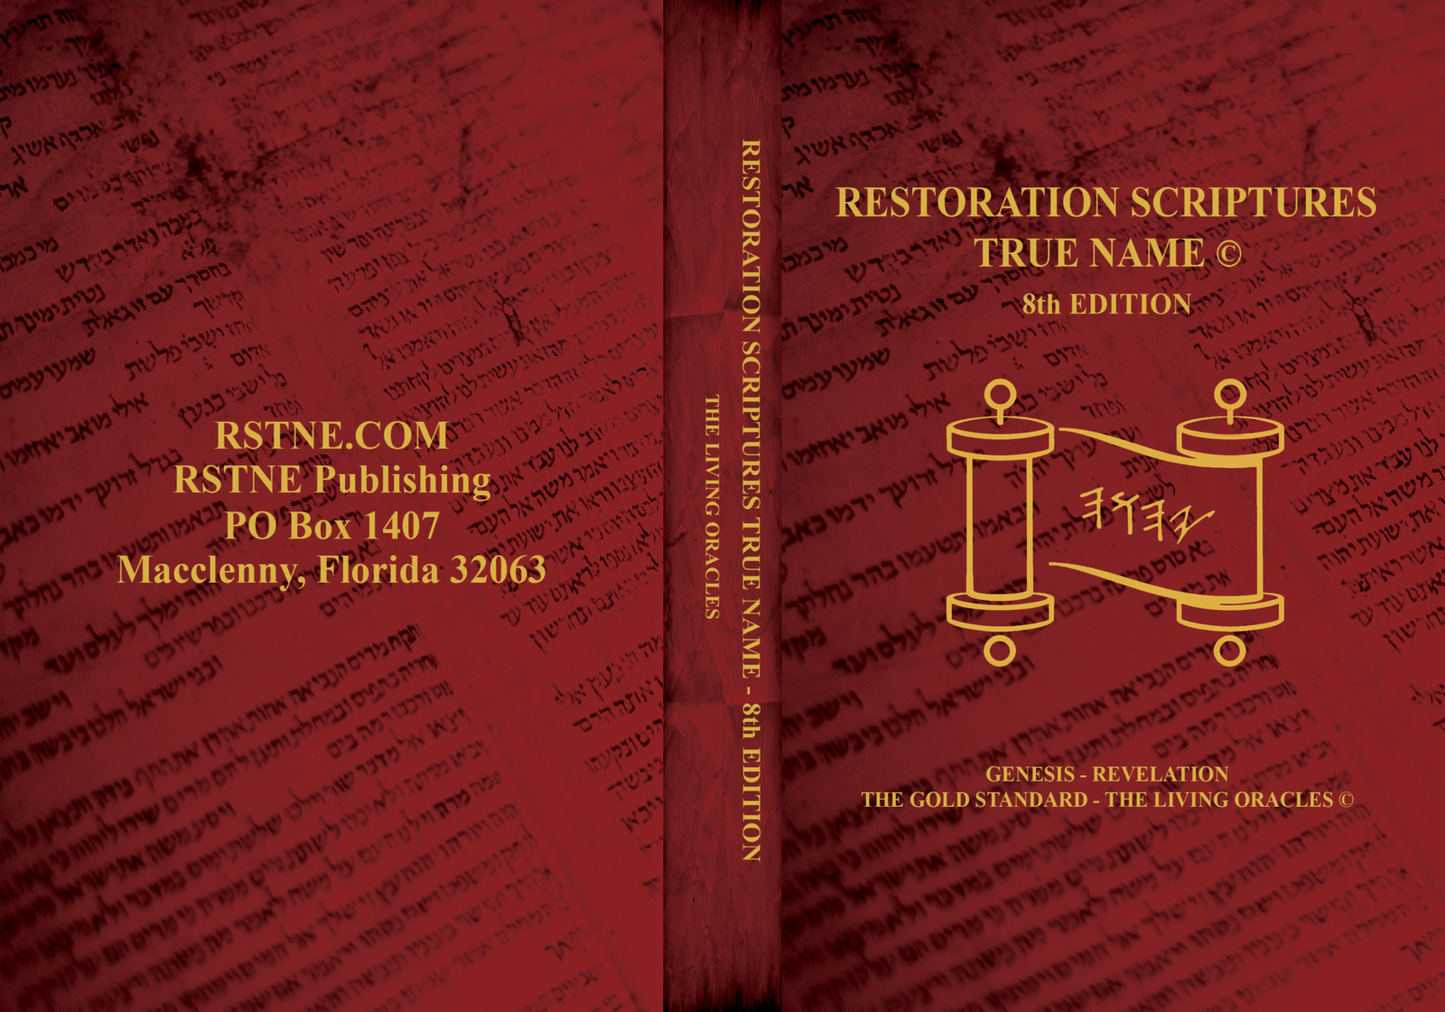 The Restoration Scriptures True Name Eighth Edition - Genesis-Revelation Softcover